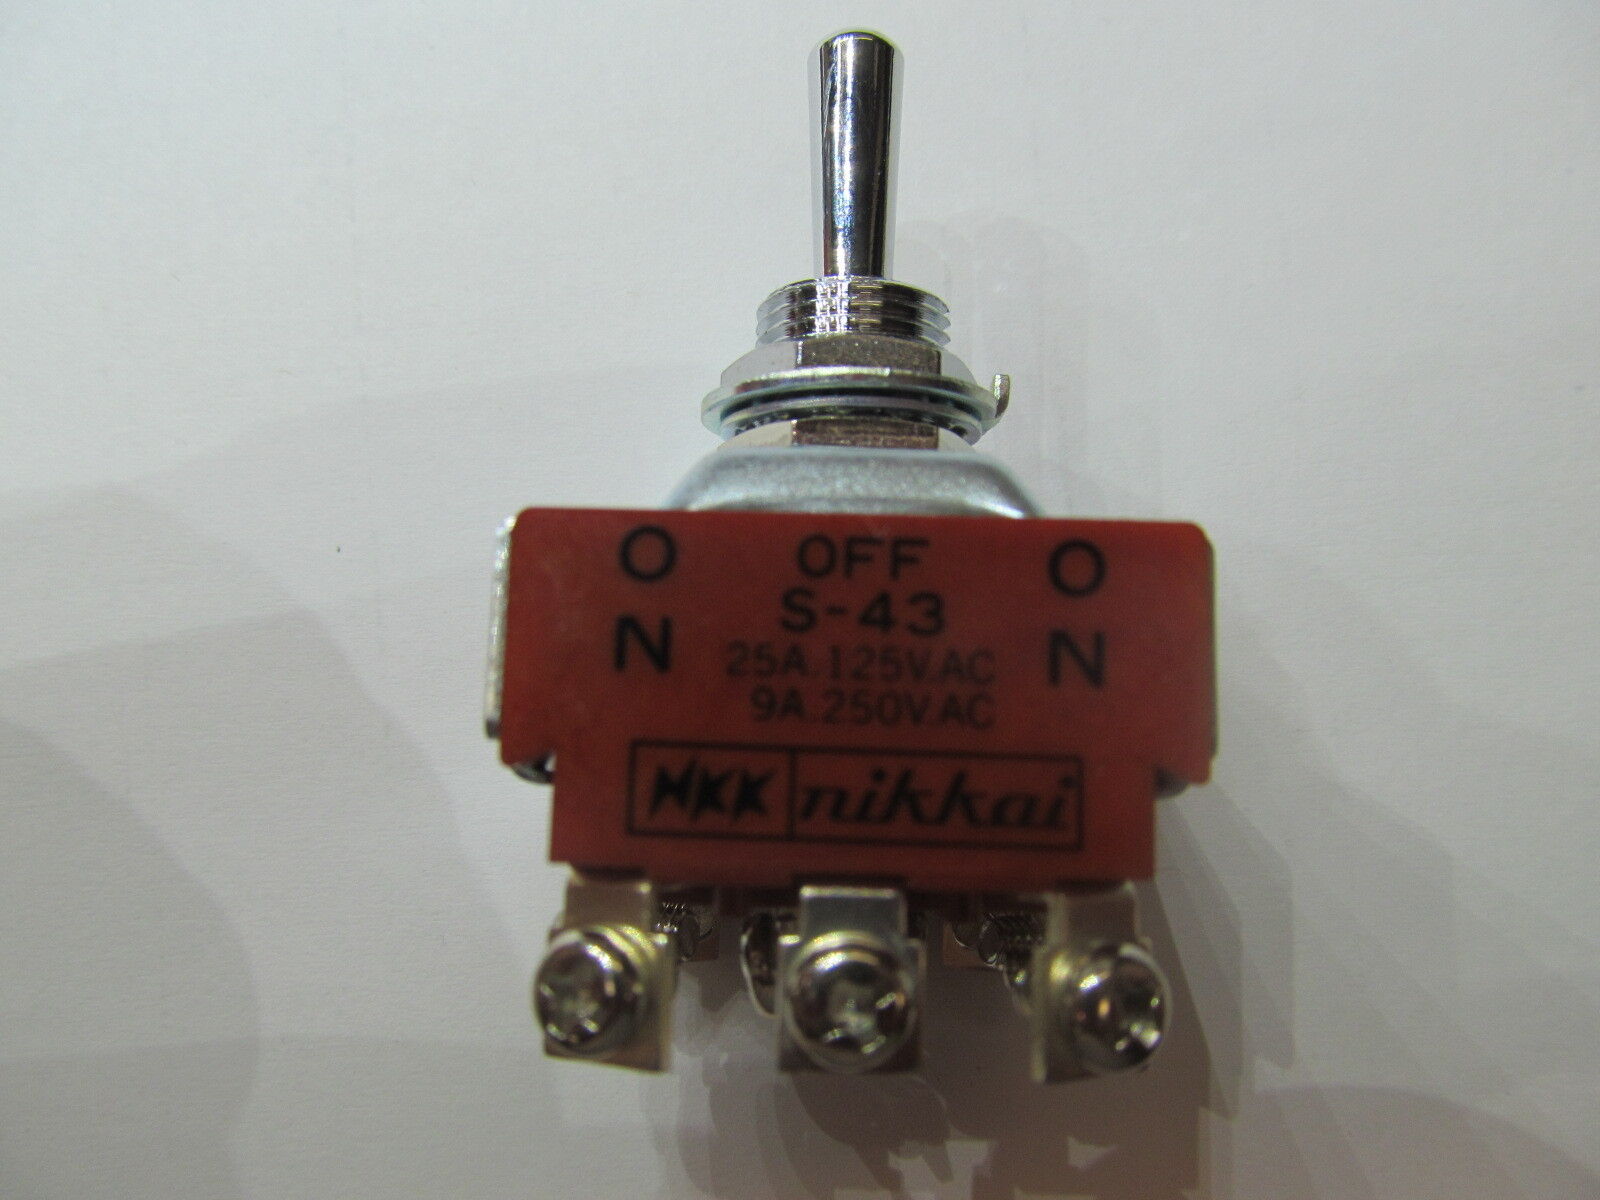 NKK SWITCHES  S43T  Toggle Switch